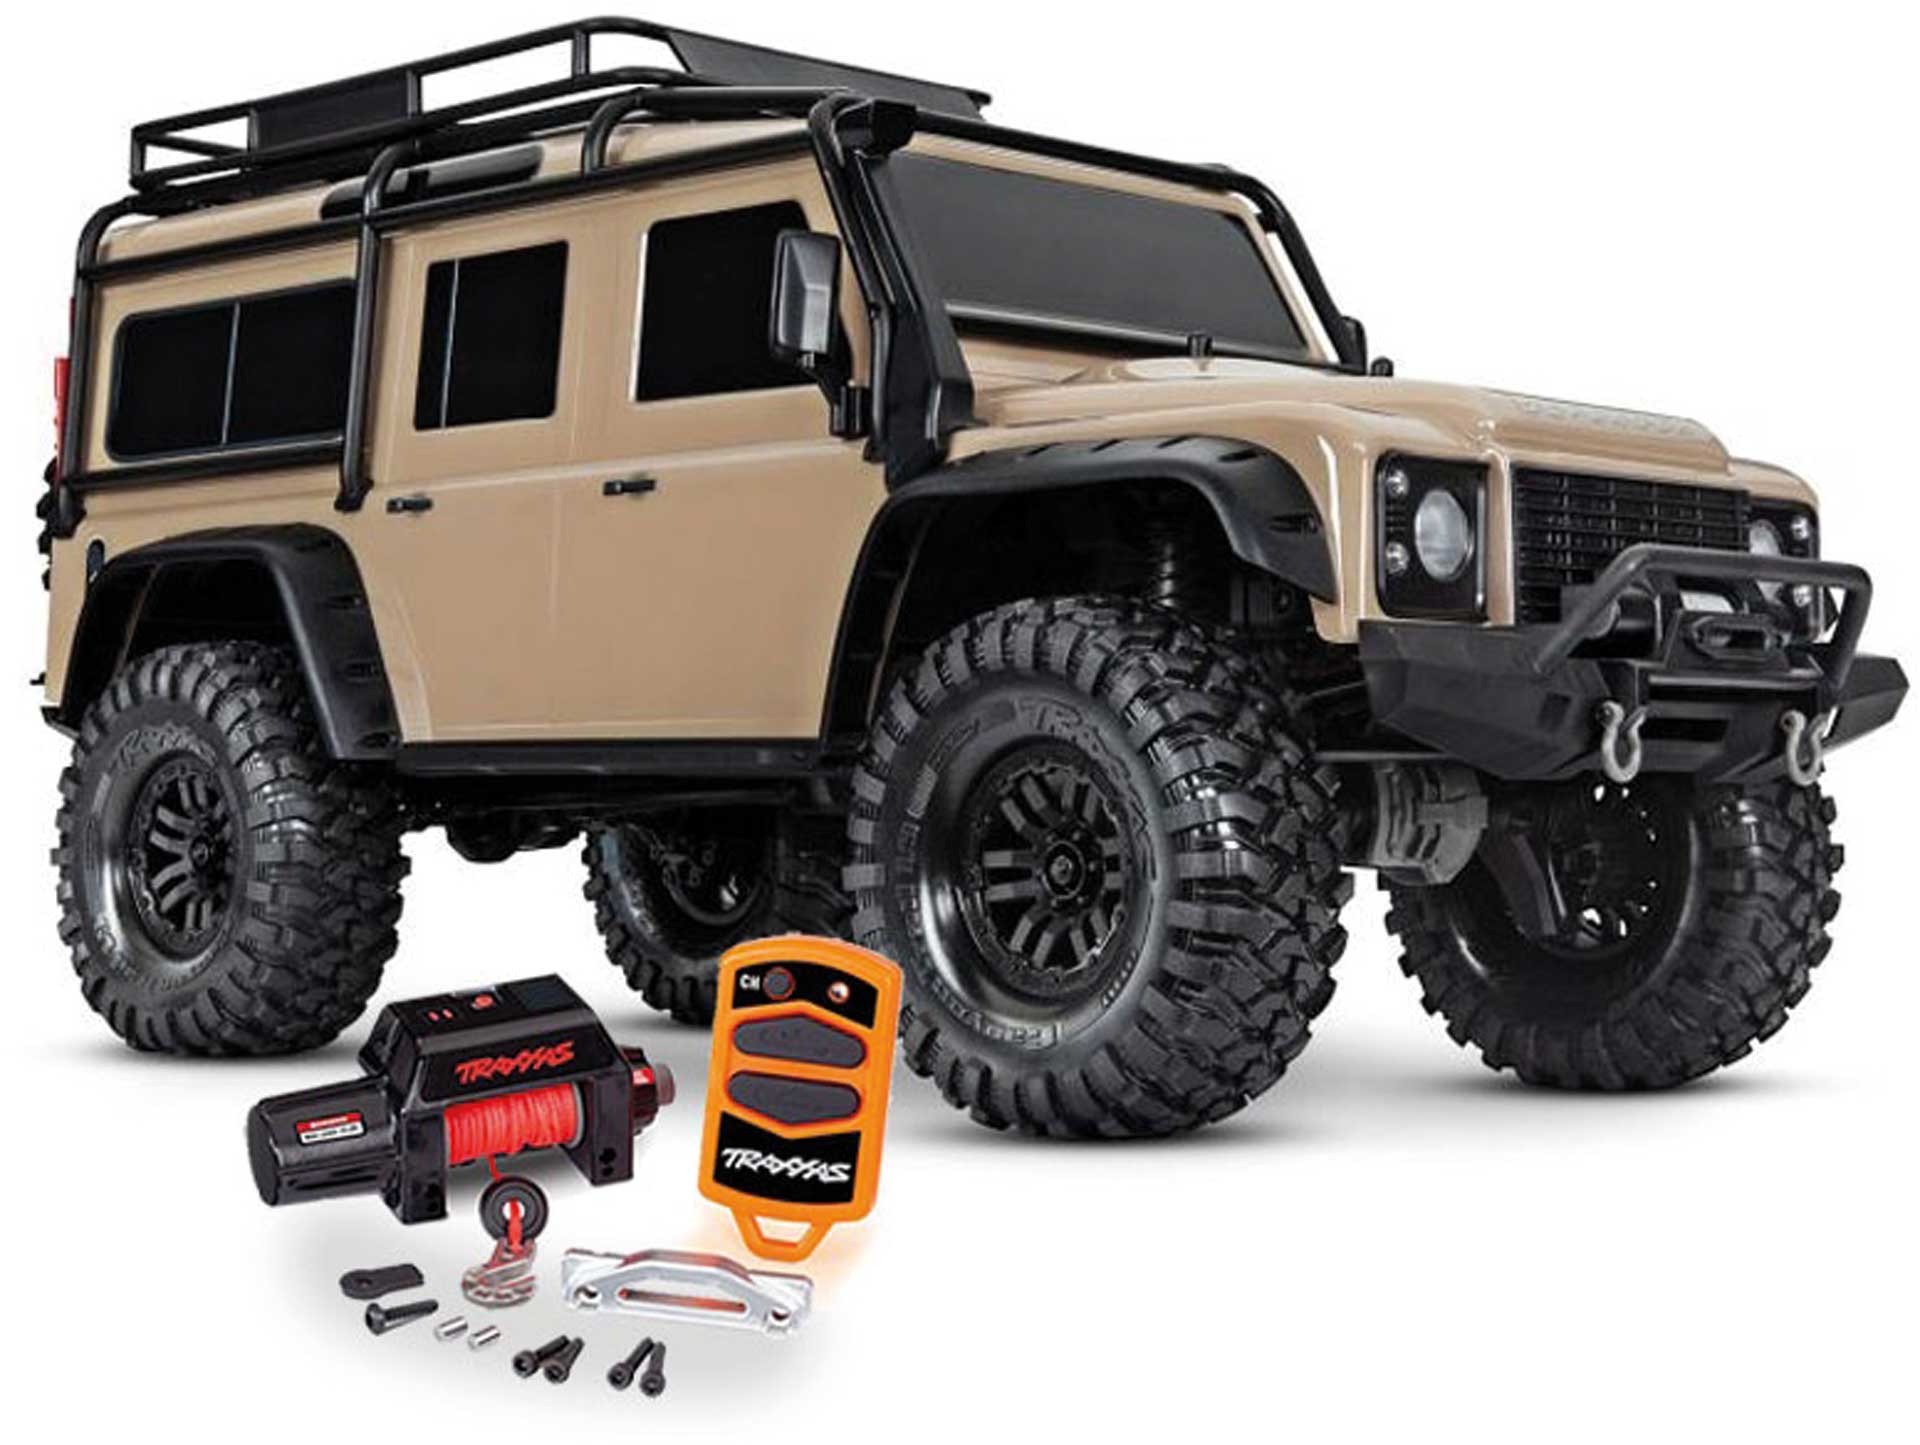 TRAXXAS TRX-4 Land Rover Defender sand 1/10 4X4 4X4 RTR Scale Crawler Brushed with winch